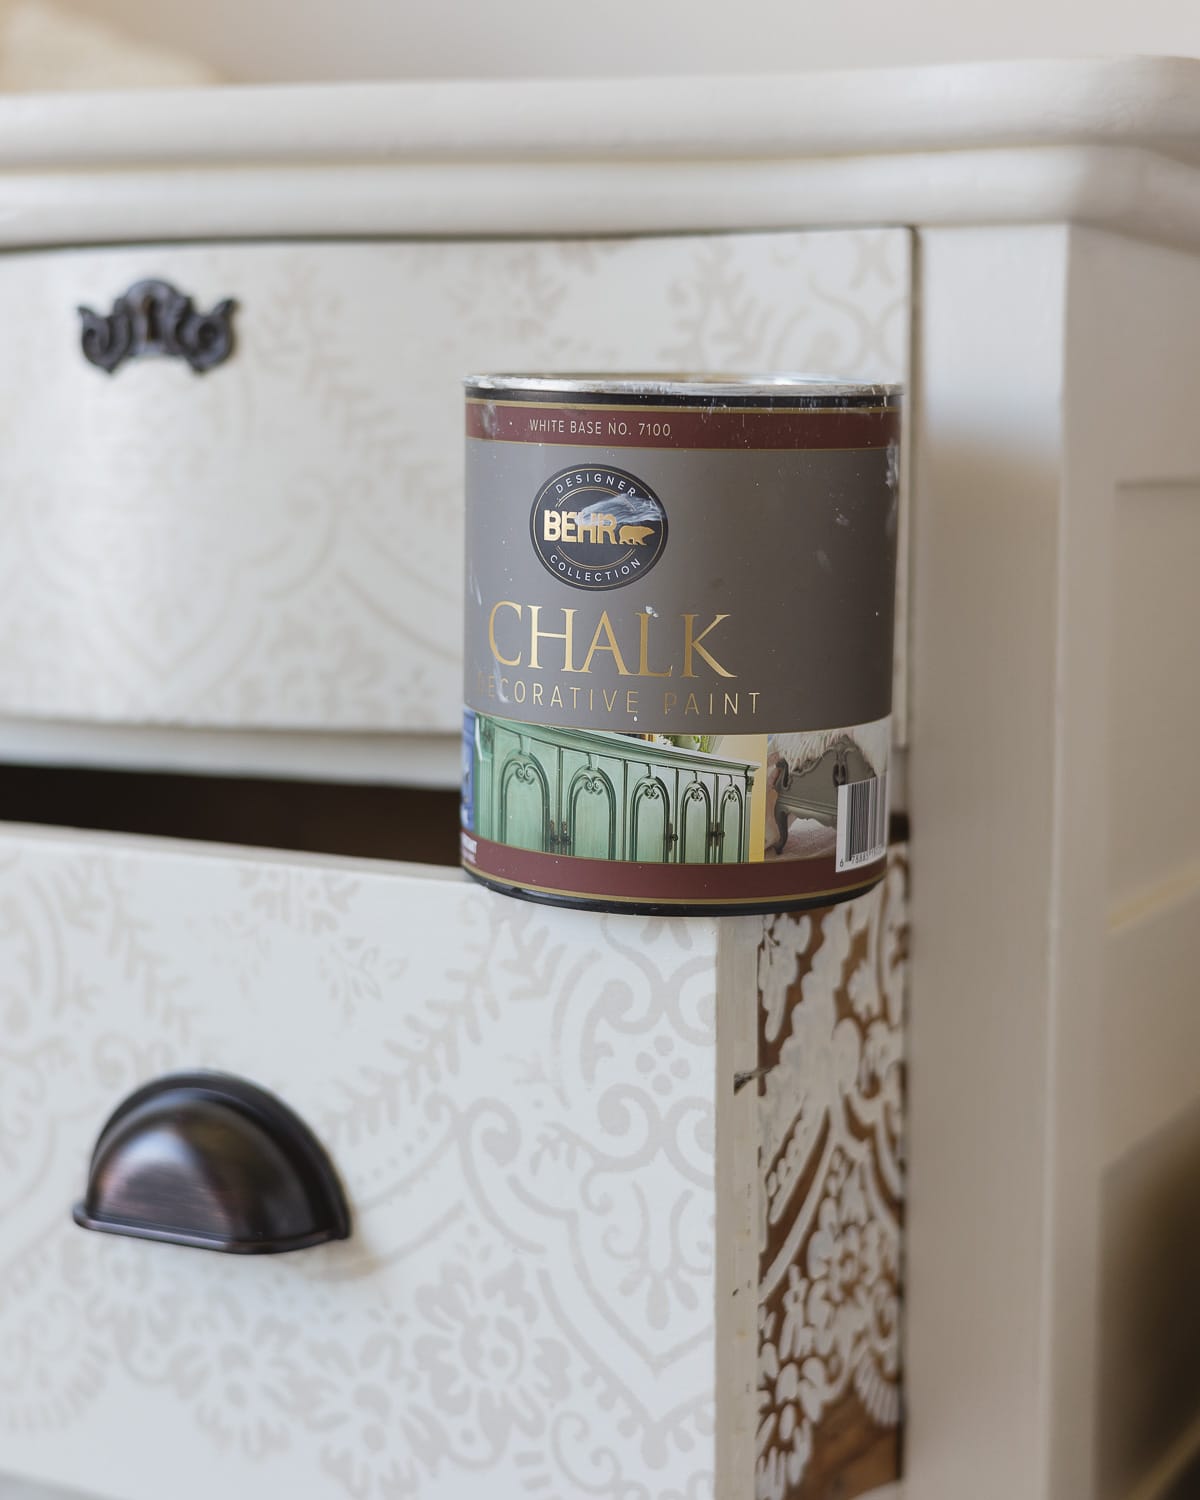 A can of Behr Decorative Chalk Paint resting on the open drawer of a dresser.